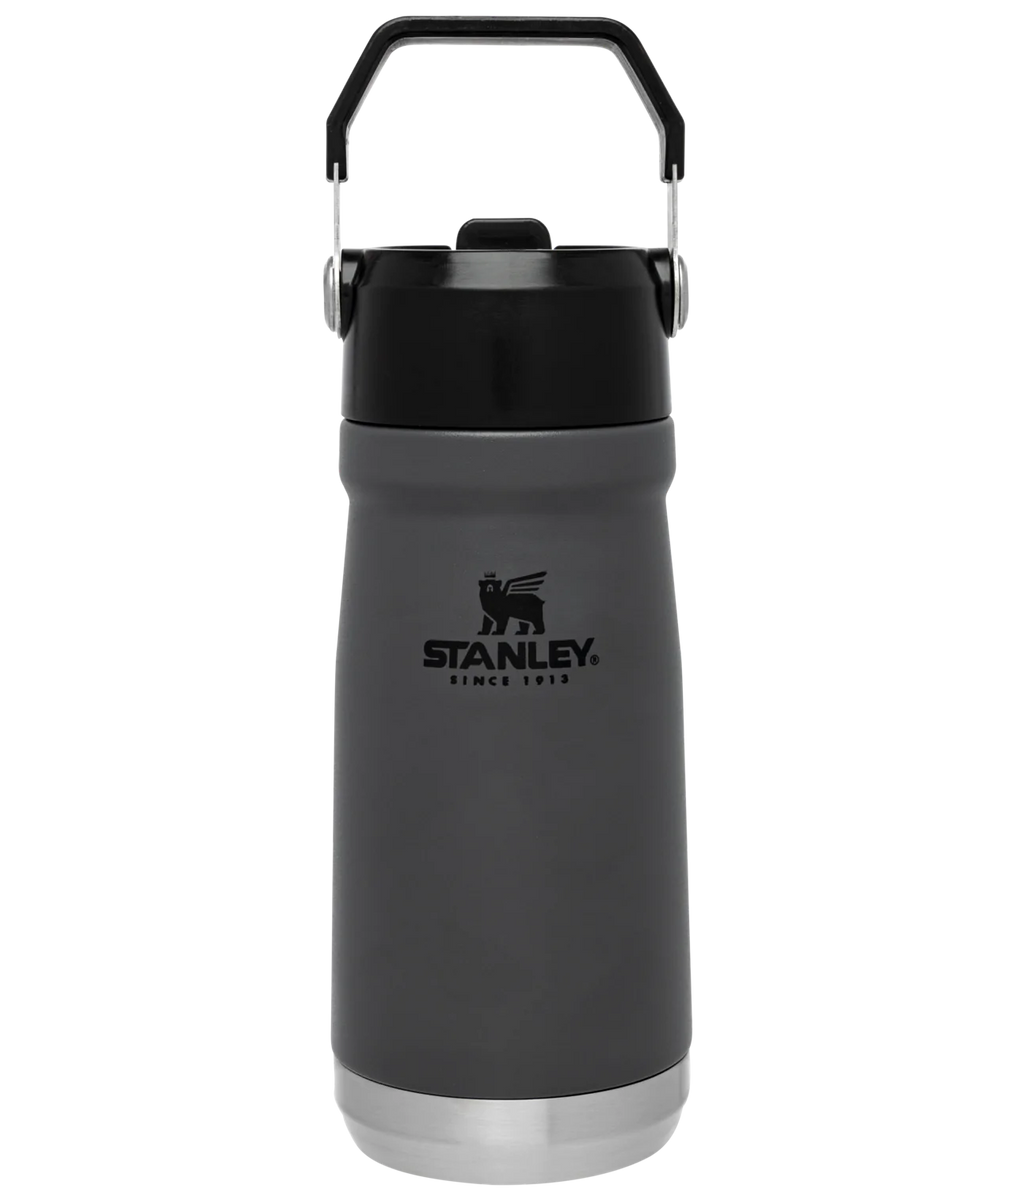 Portable Camping Double Wall Stanleys Insulated Water Bottle Cup